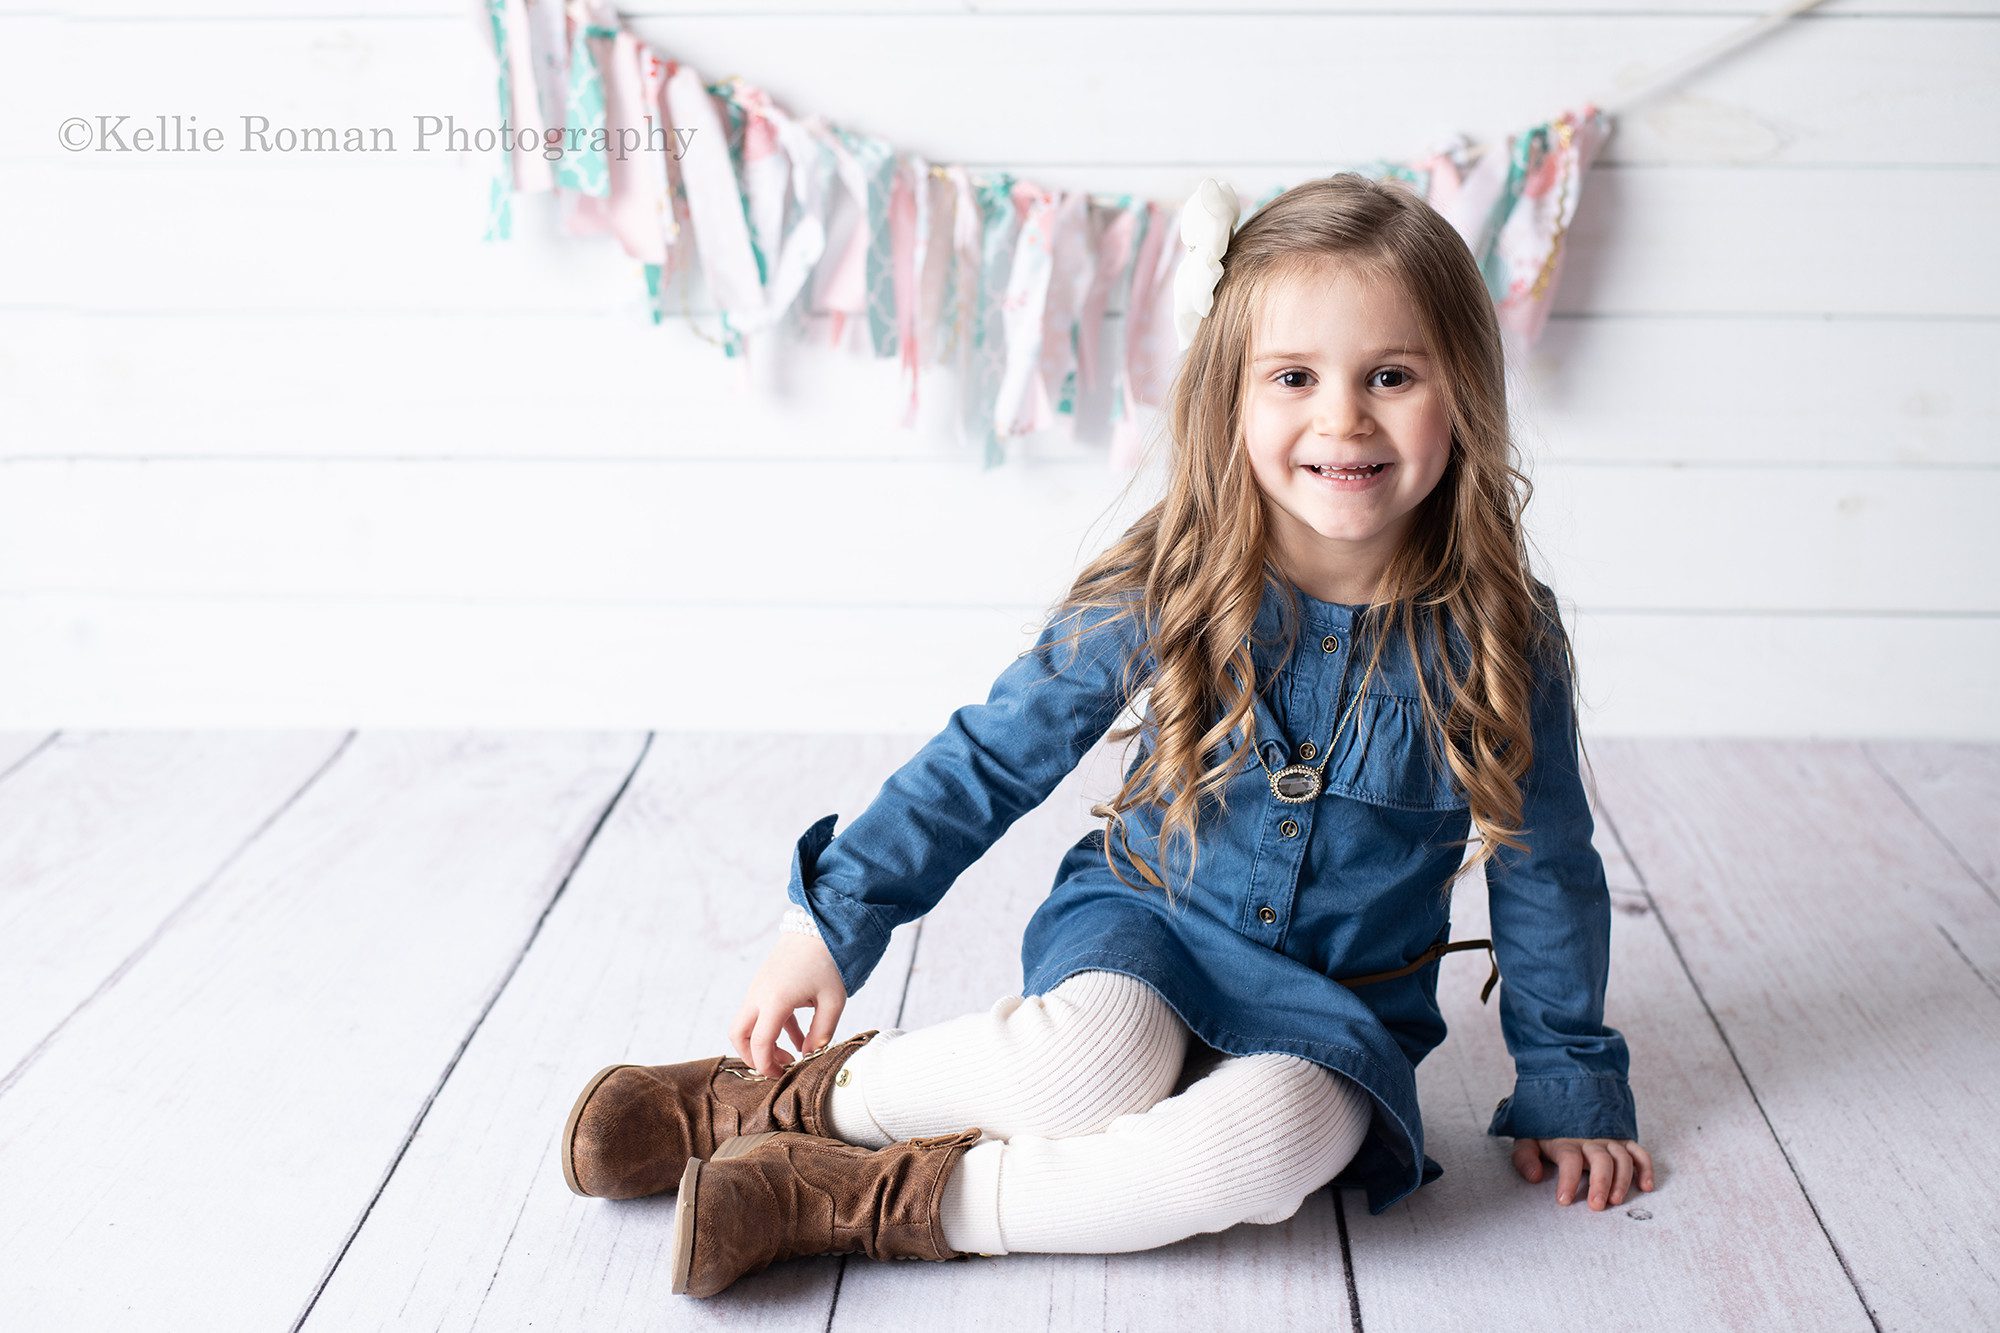 six month milestone a young girl is in a milwaukee photo studio having her pics taken. she is wearing a denim dress with white leggings and brown boots. She has long dark blonde hair and is smiling at the camera. she's sitting on a white wood floor in front of a white wood backdrop and it has a teal and pink fabric banner hanging.